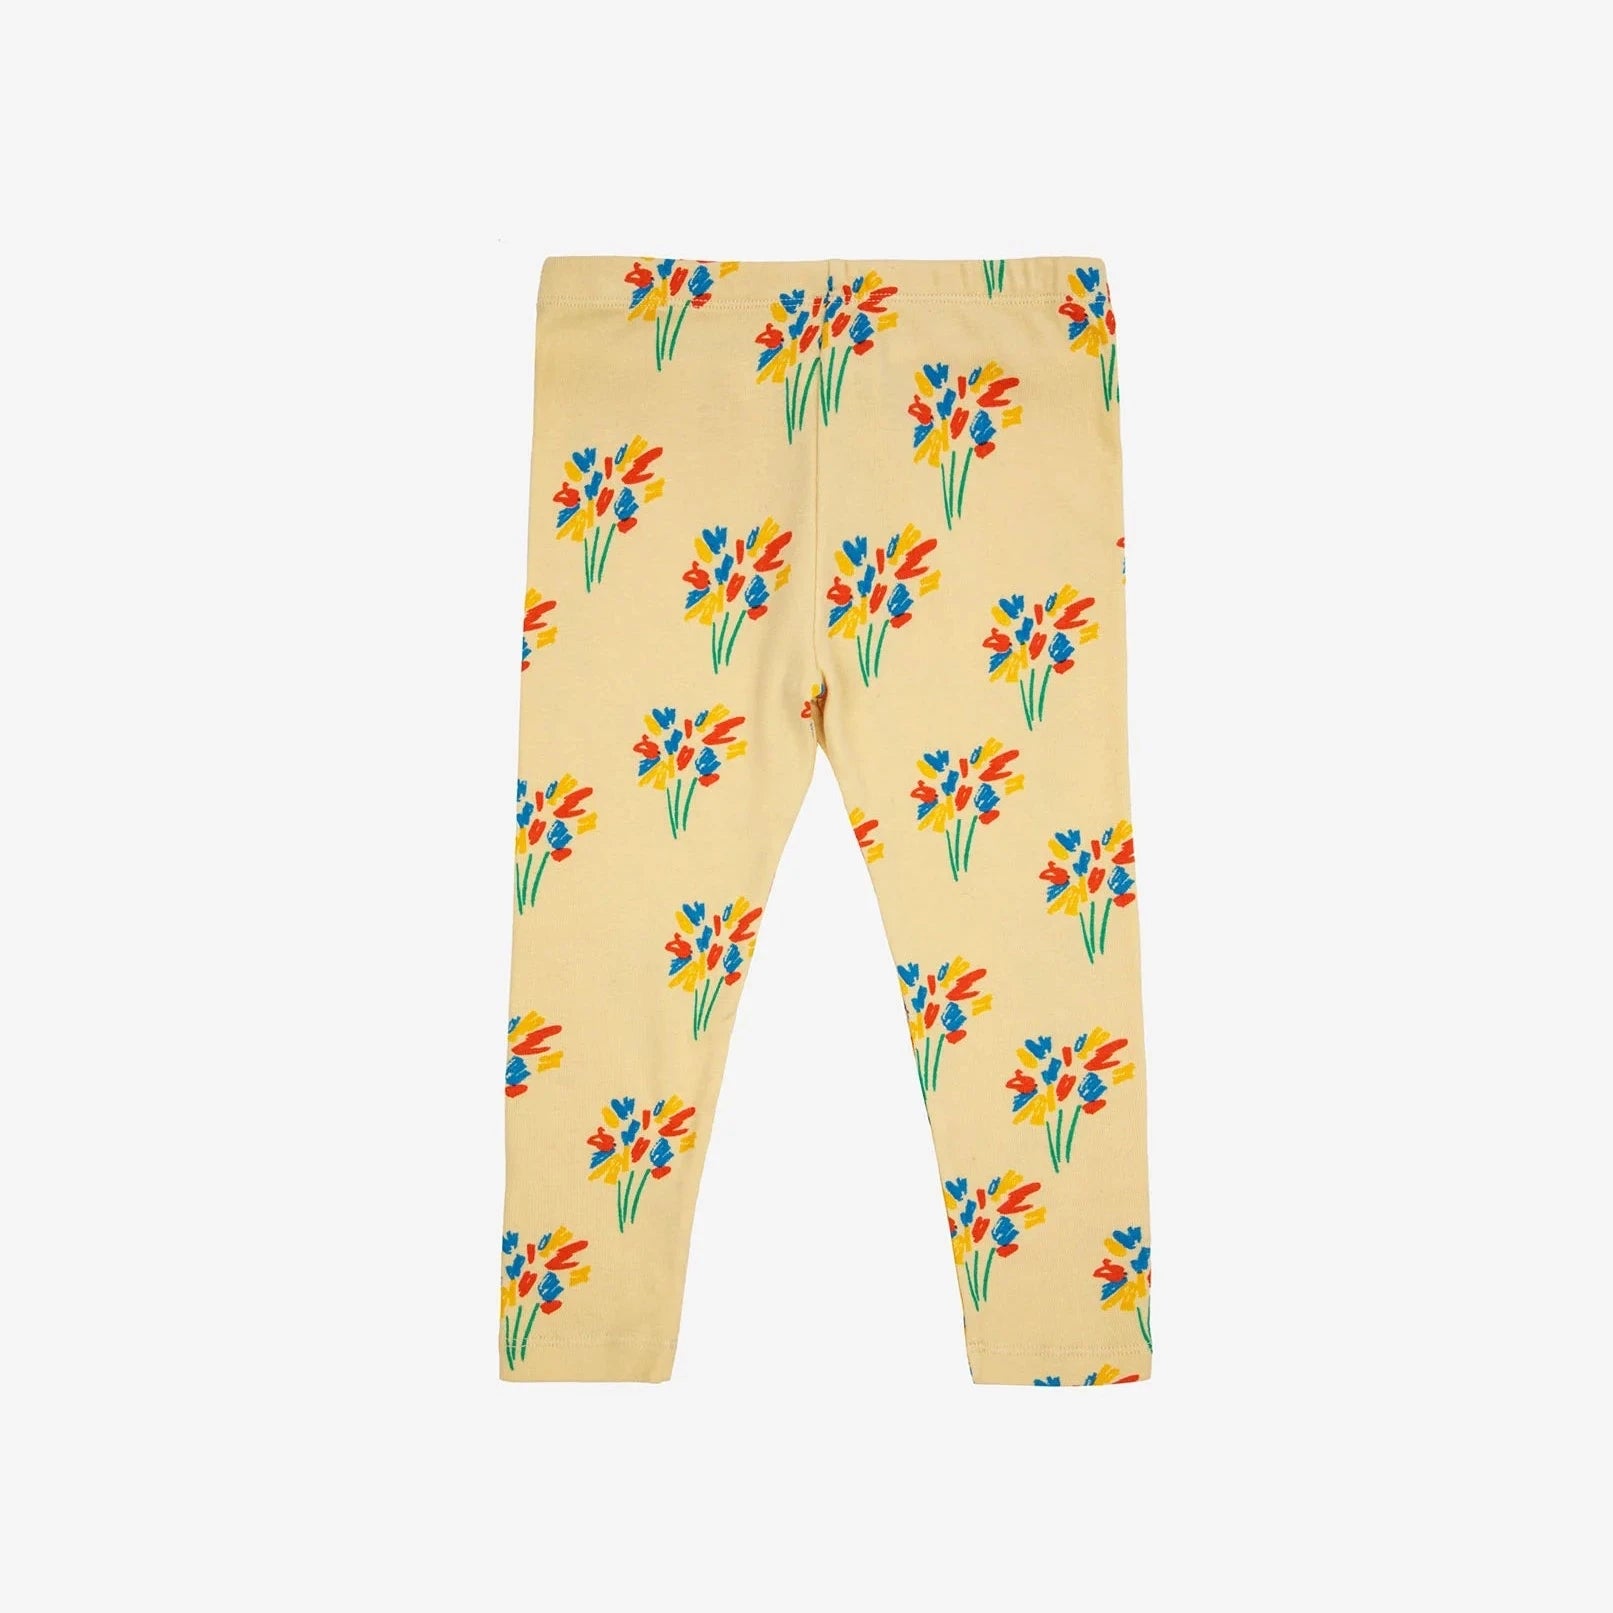 yellow pants with colorful fireworks pattern